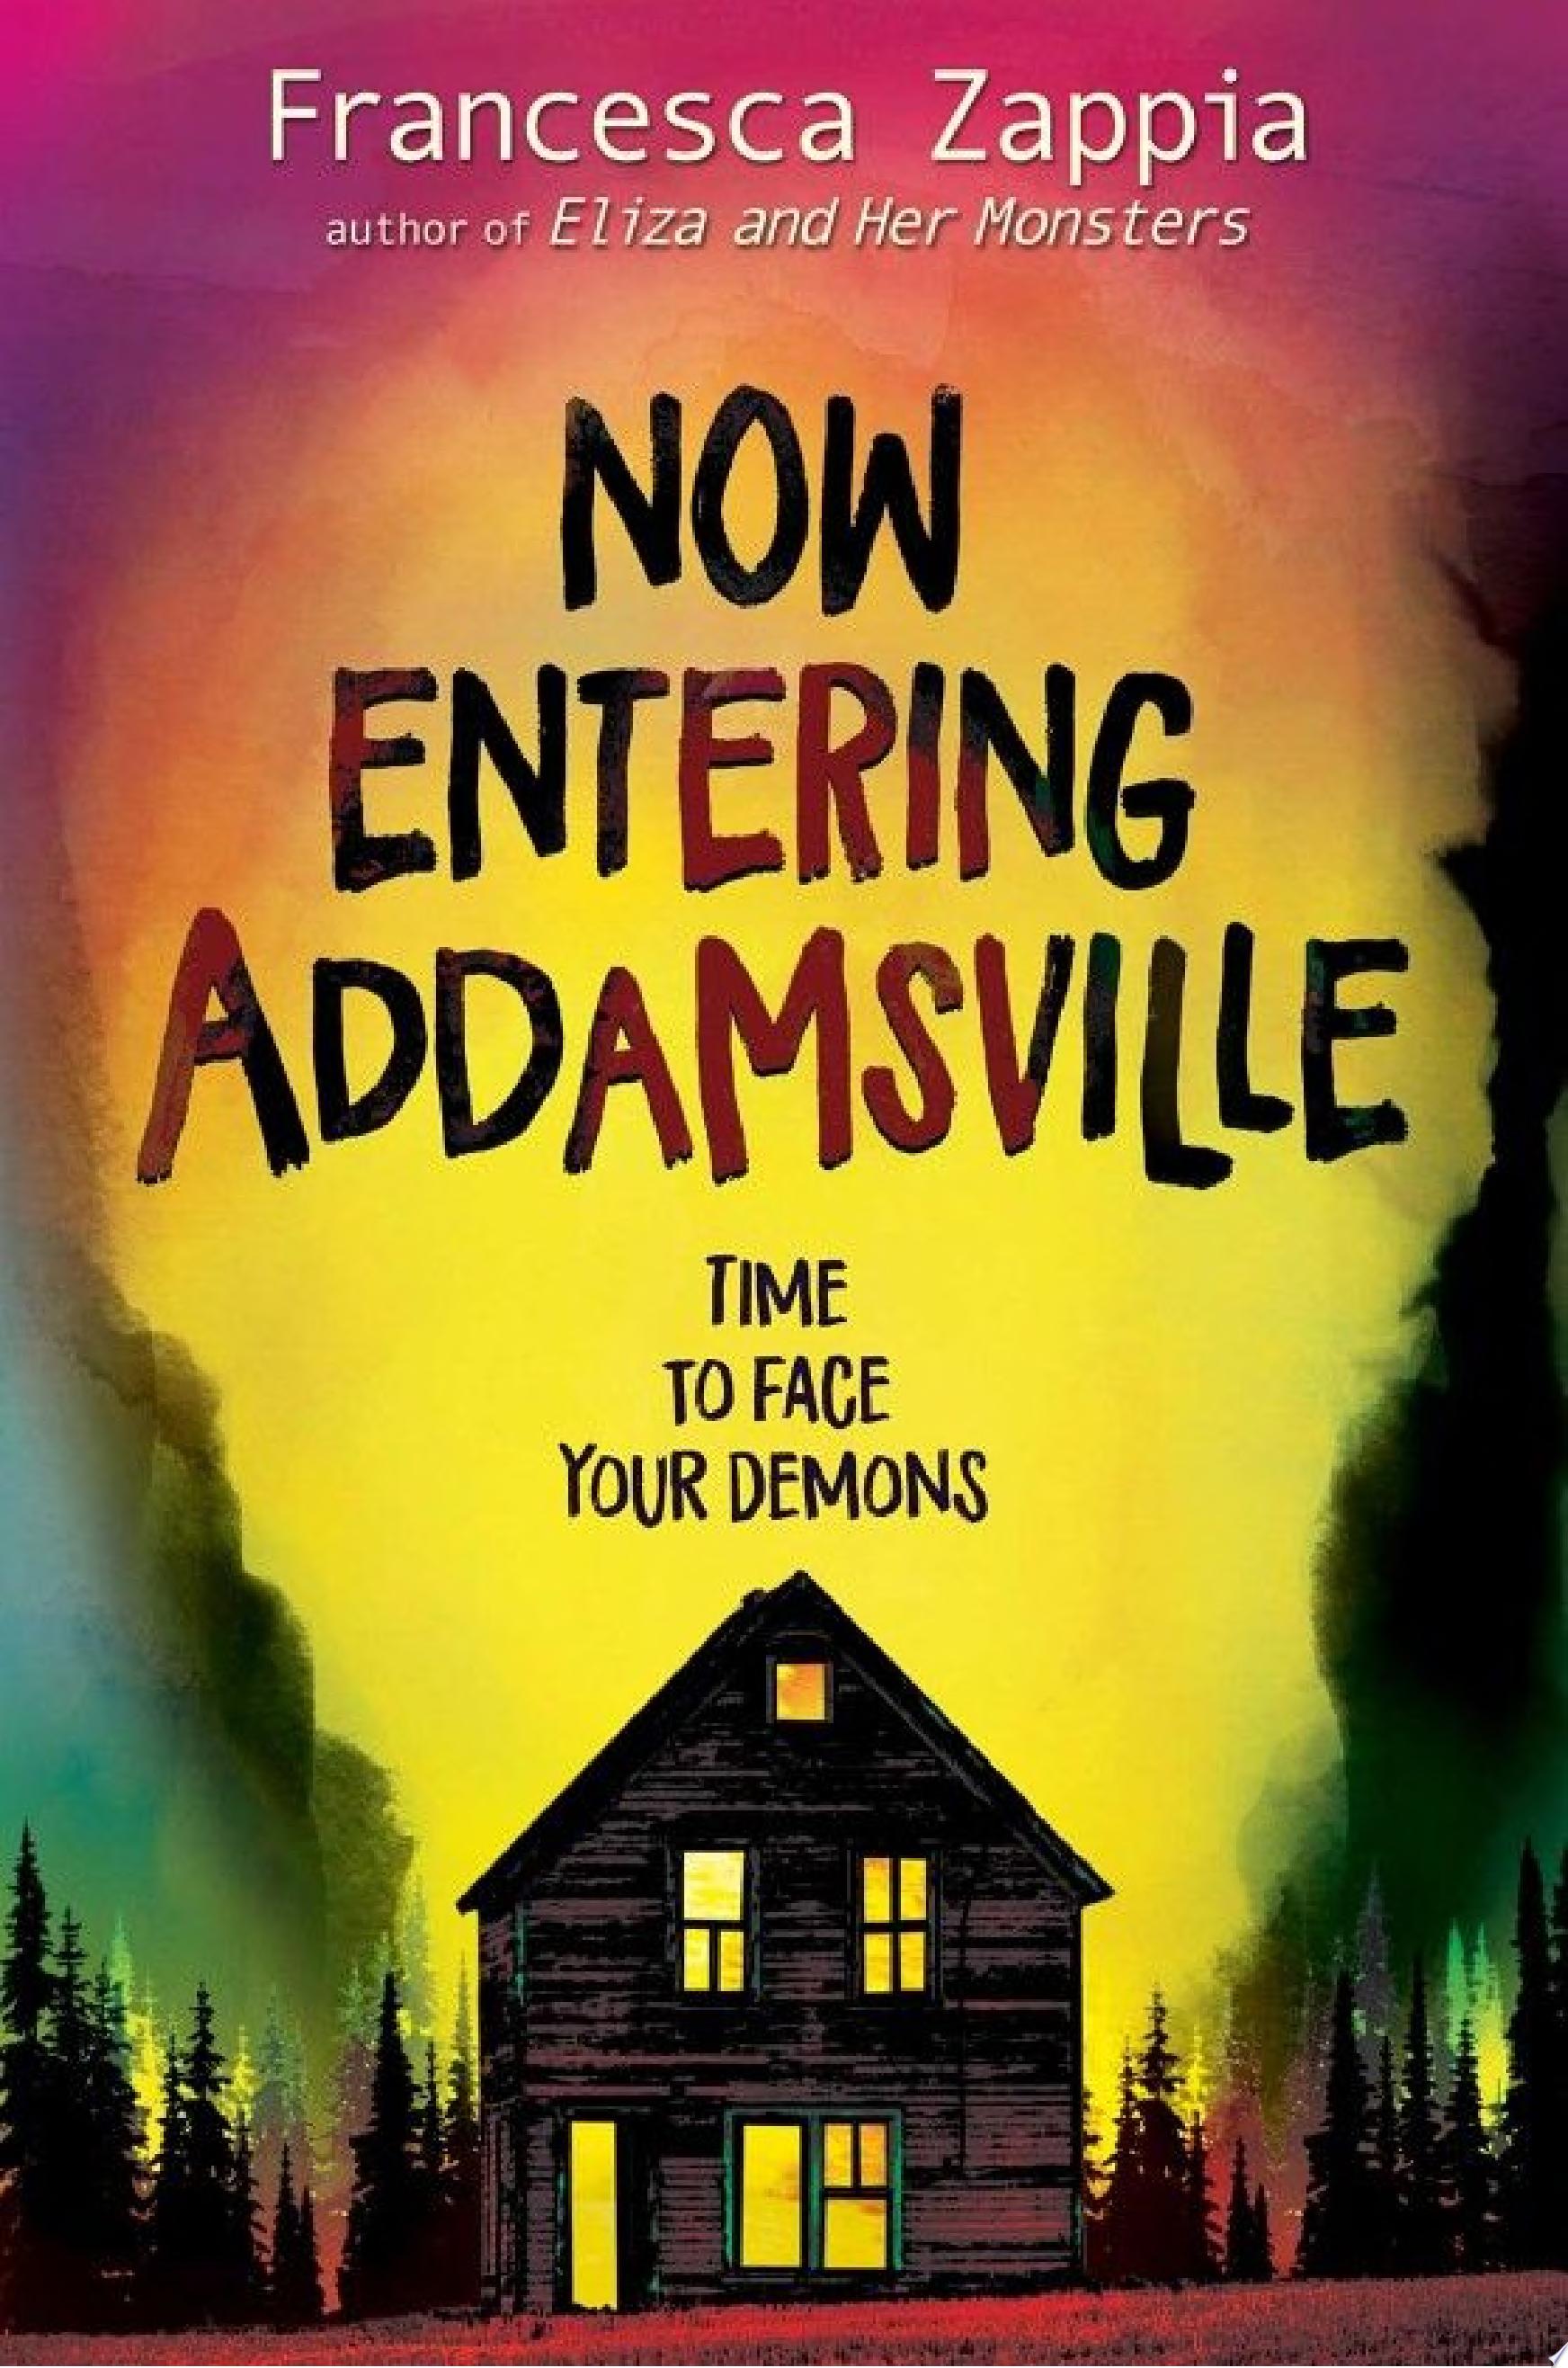 Image for "Now Entering Addamsville"